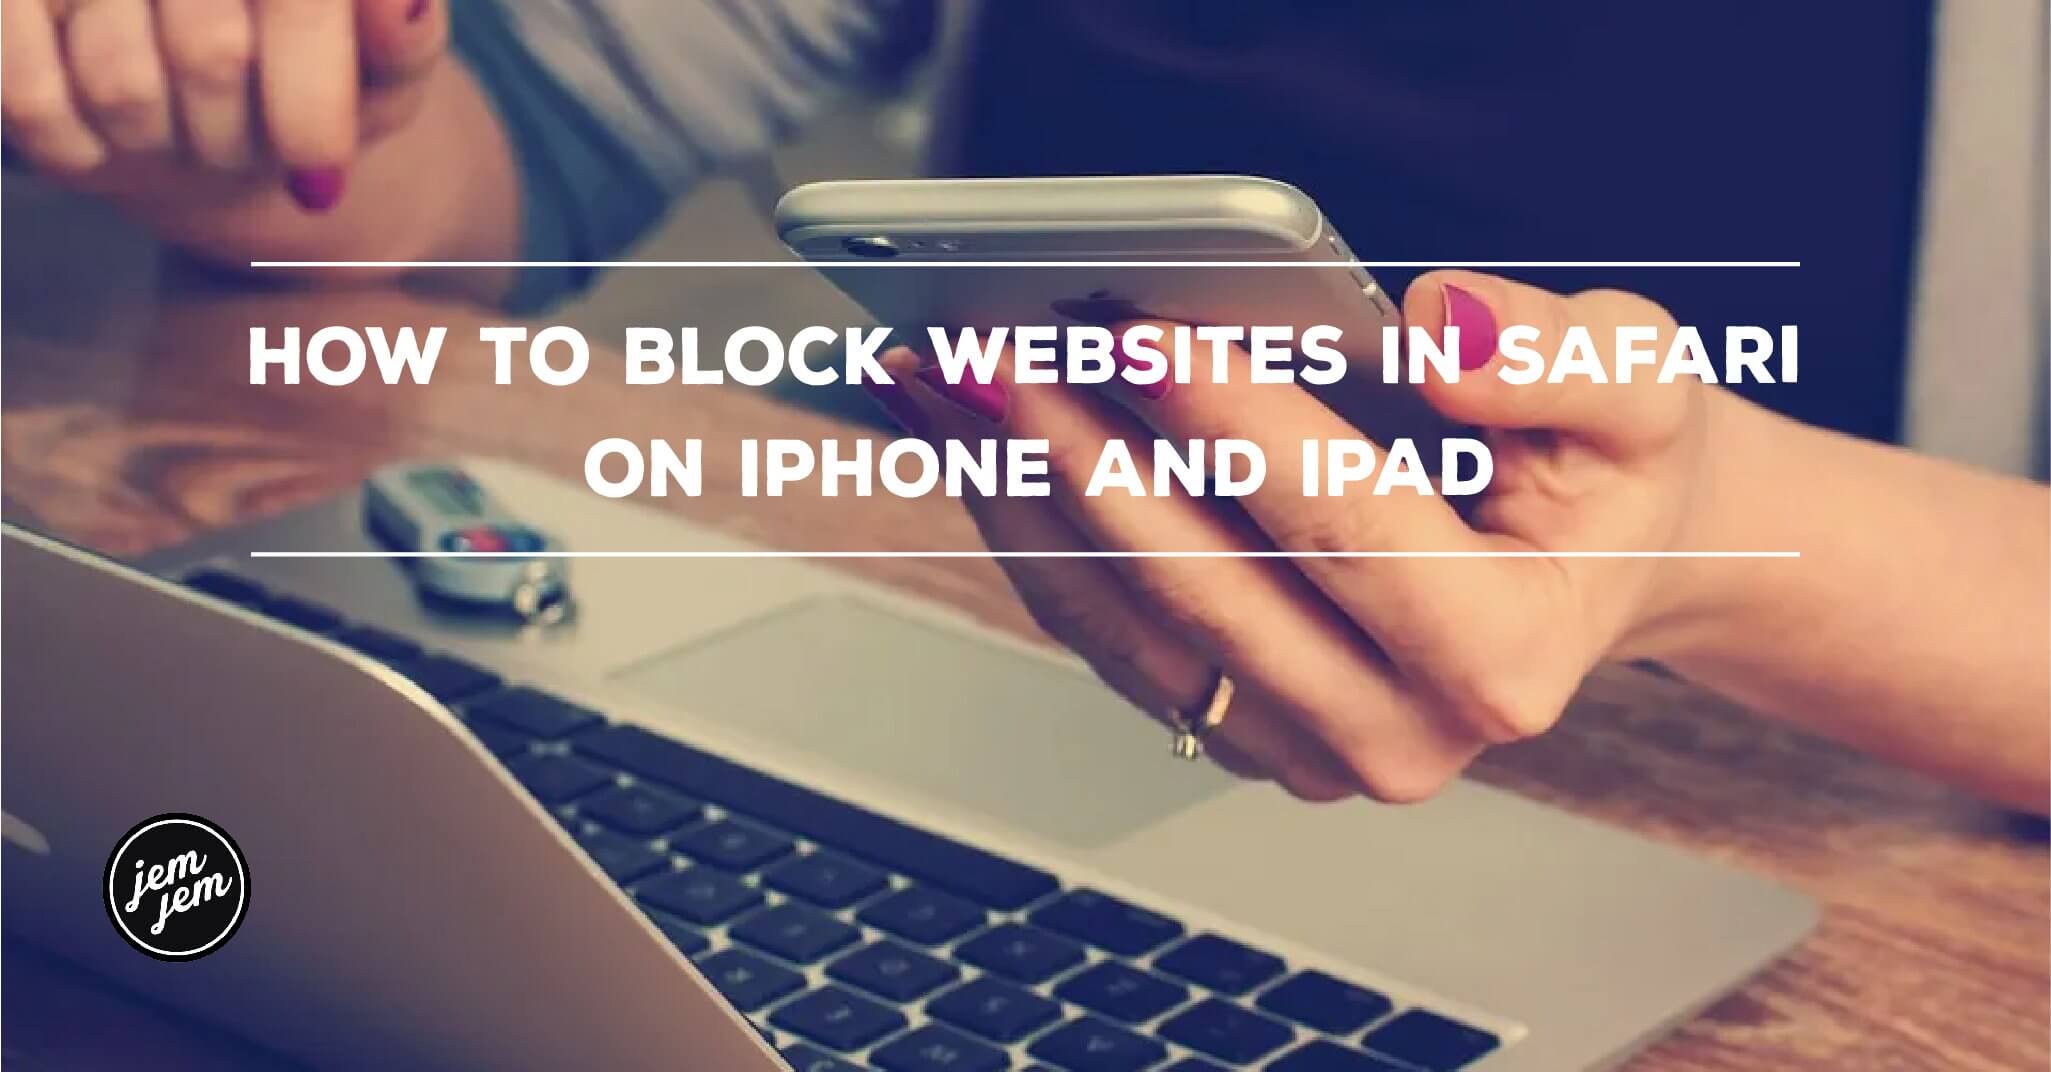 How to block websites in Safari on iPhone and iPad